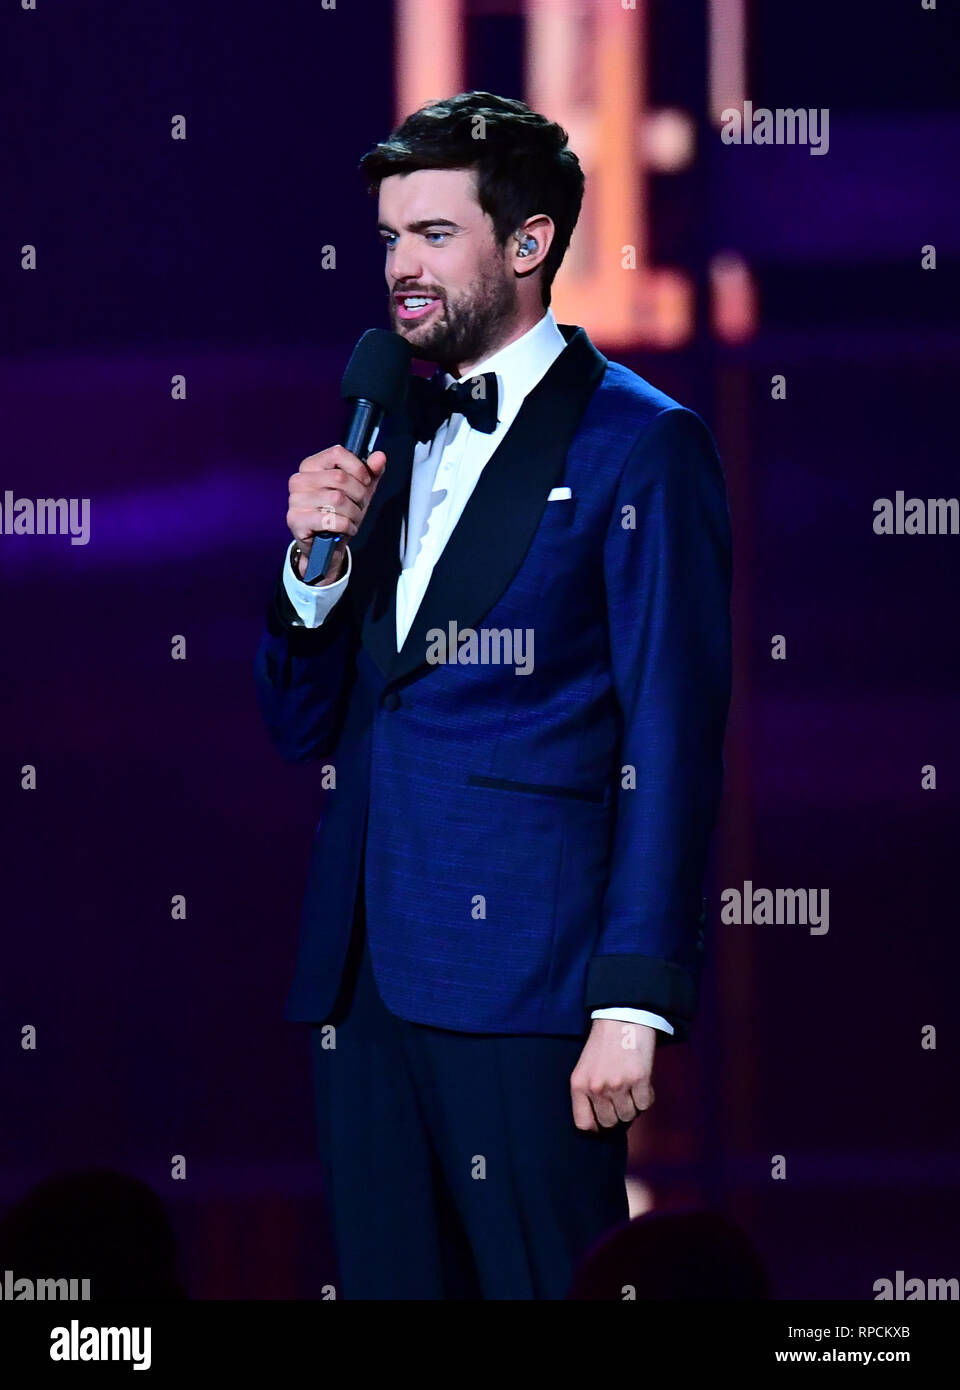 Jack Whitehall on stage at the Brit Awards 2019 at the O2 Arena, London, the host Jack Whitehall's quip about fathers grabbing 'scatter cushions' following Little Mix's performance did not please all viewers. Stock Photo